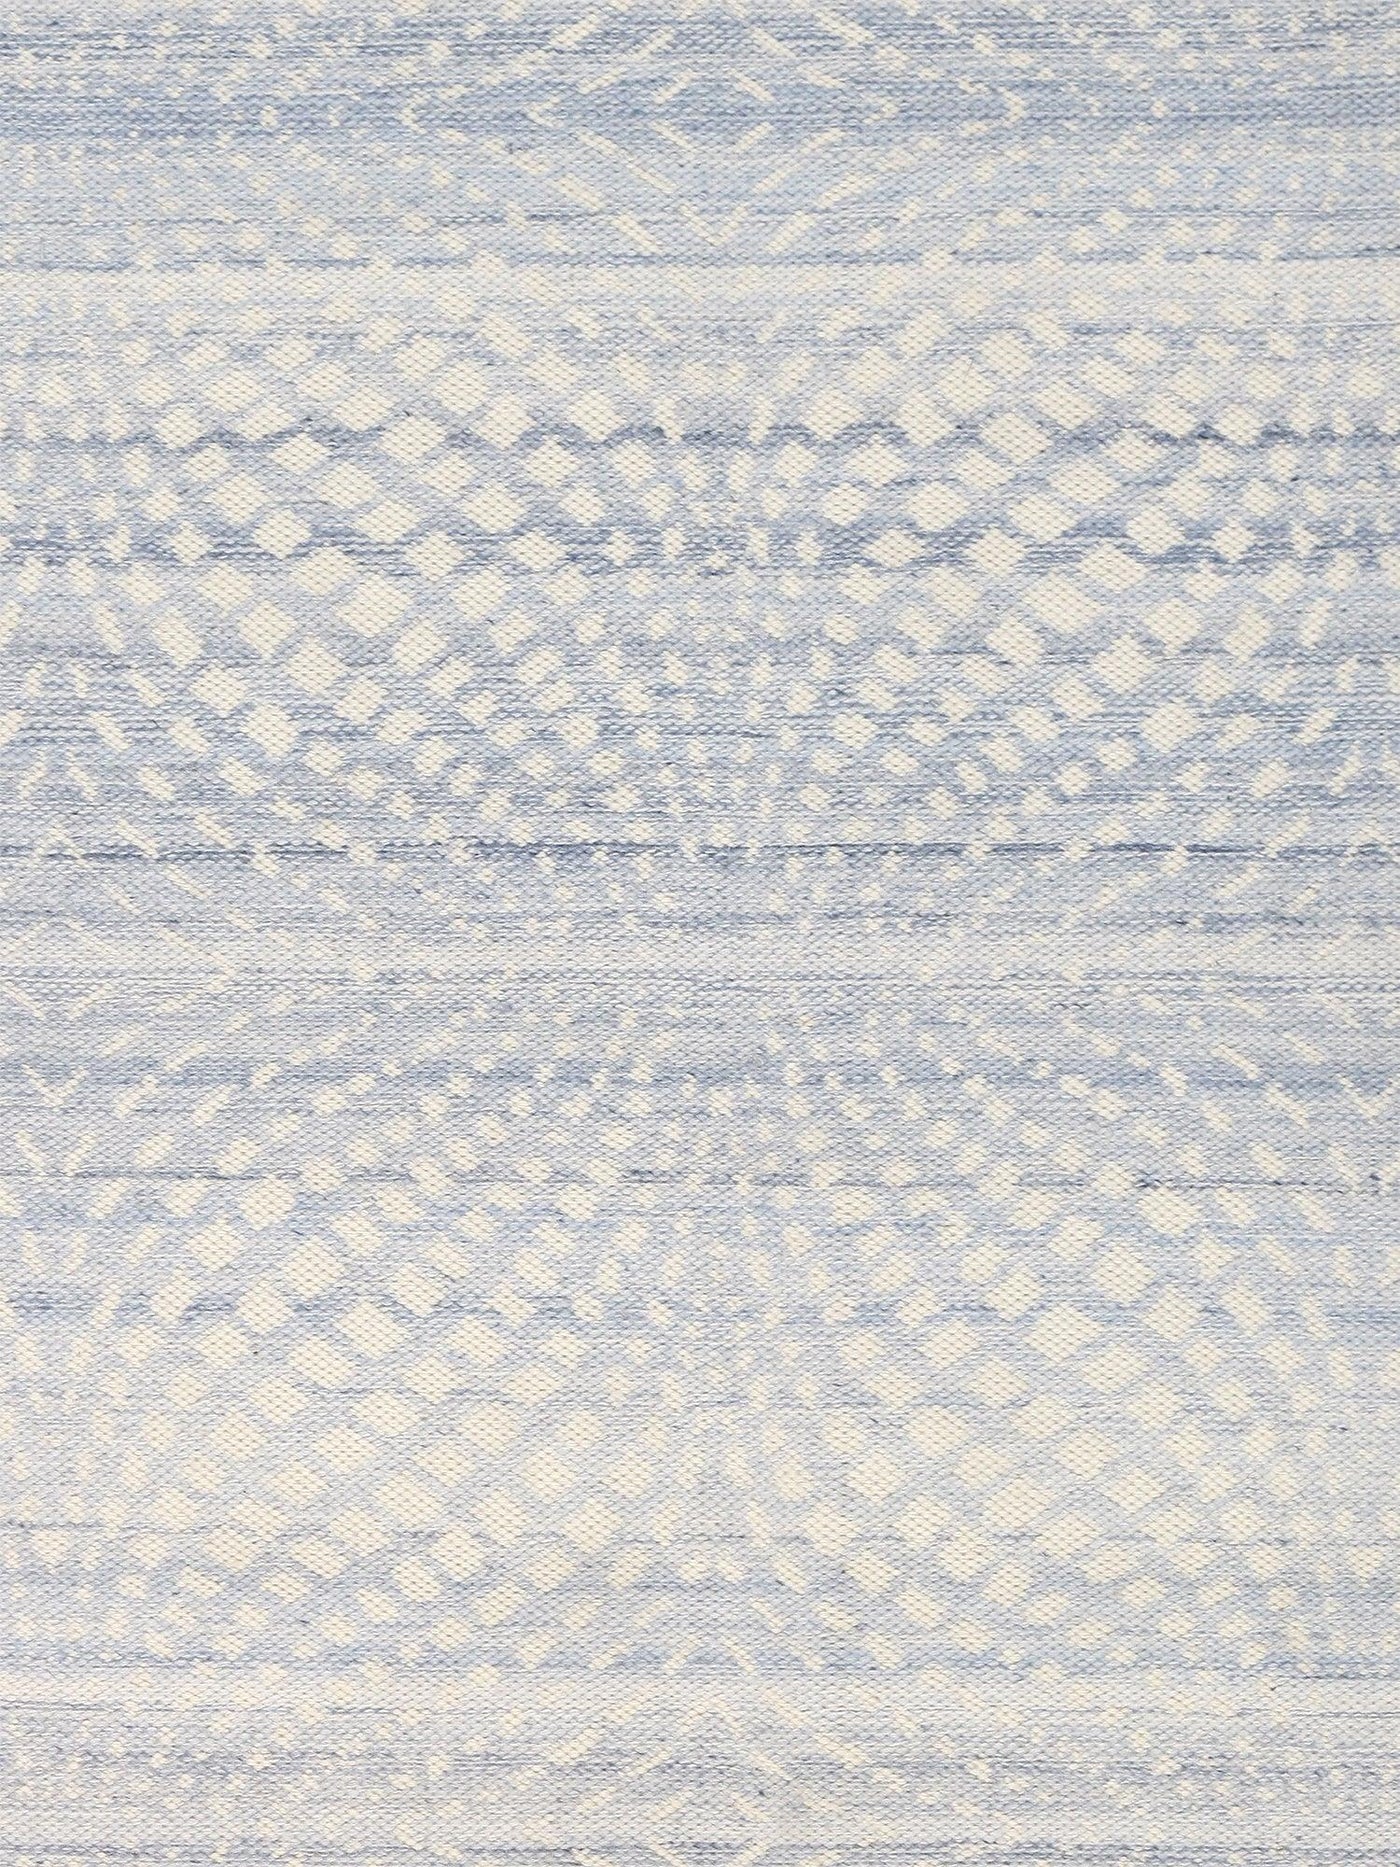 Canvello Transitional Collection Flat Weave Polyester L. Blue Area Rug - 5' x 7'6"